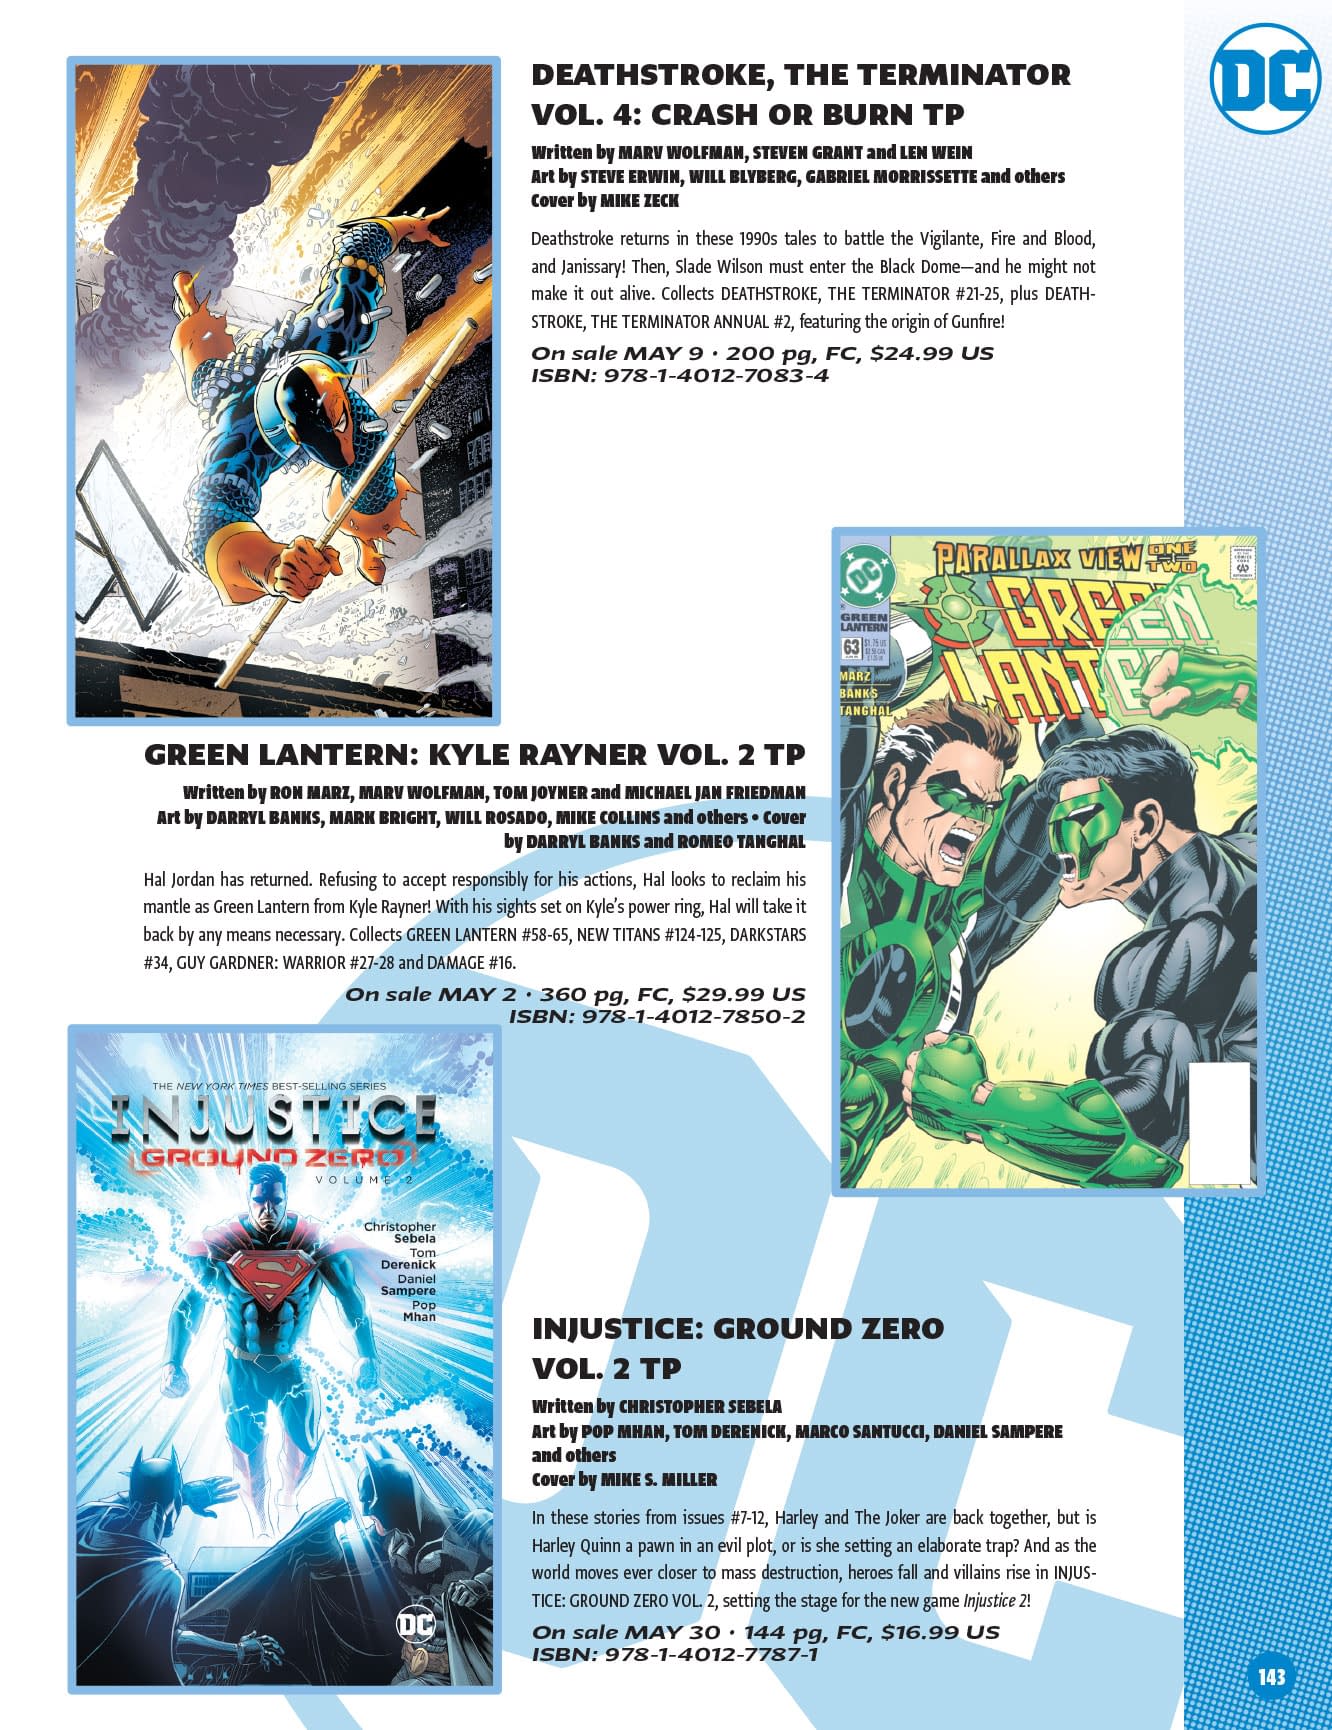 DC Comics April 2018 Catalog &#8211; Solicits From Action Comics #1000 to Splitting Batman In Two&#8230;